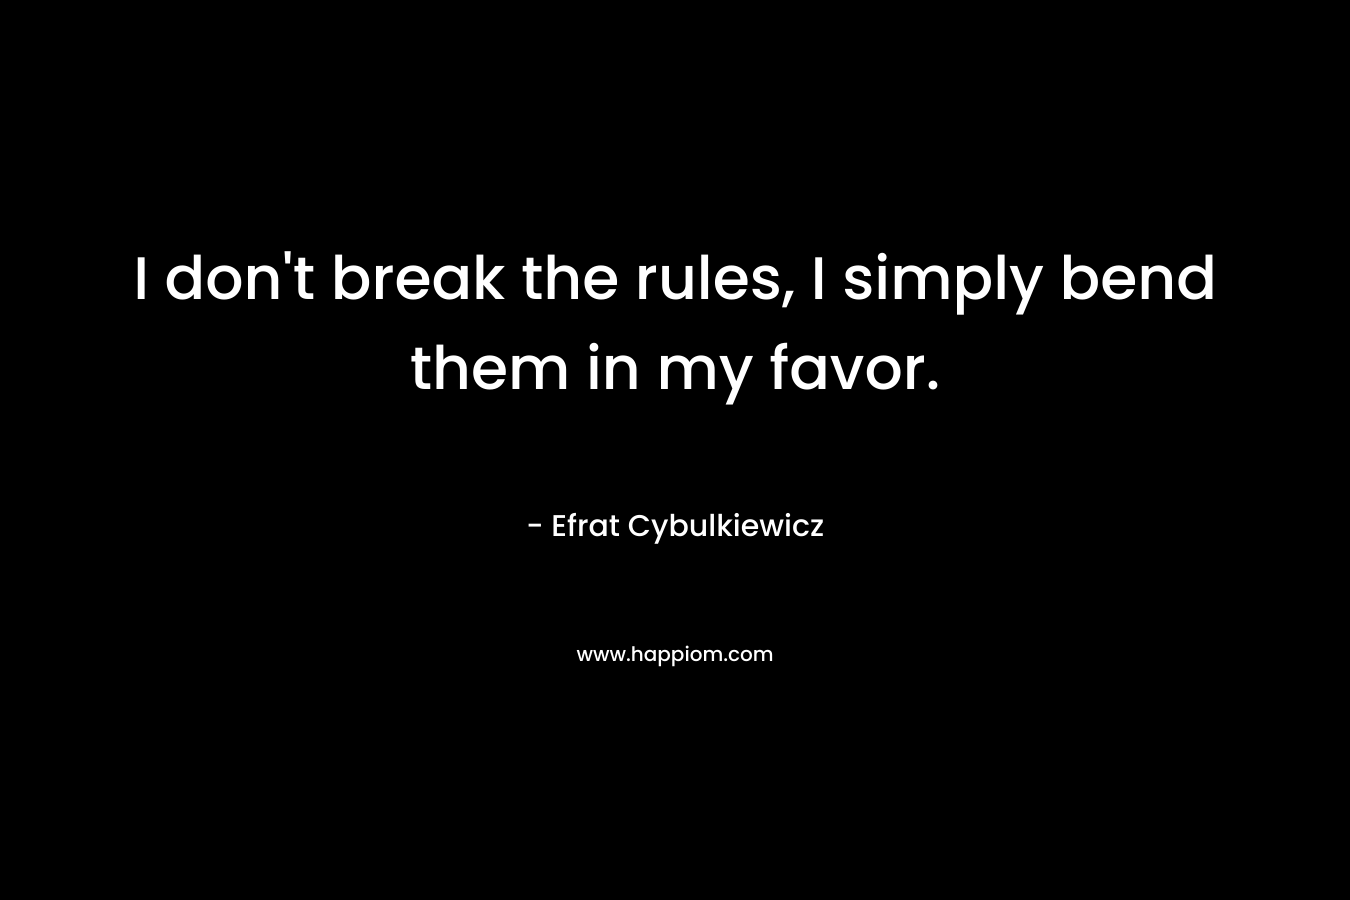 I don't break the rules, I simply bend them in my favor.